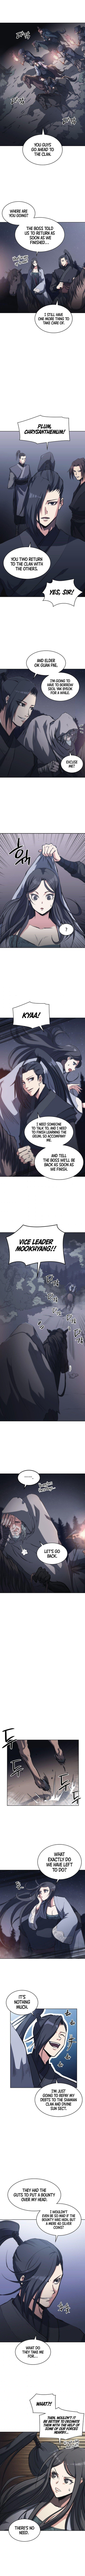 MookHyang – The Origin - Chapter 21 Page 4